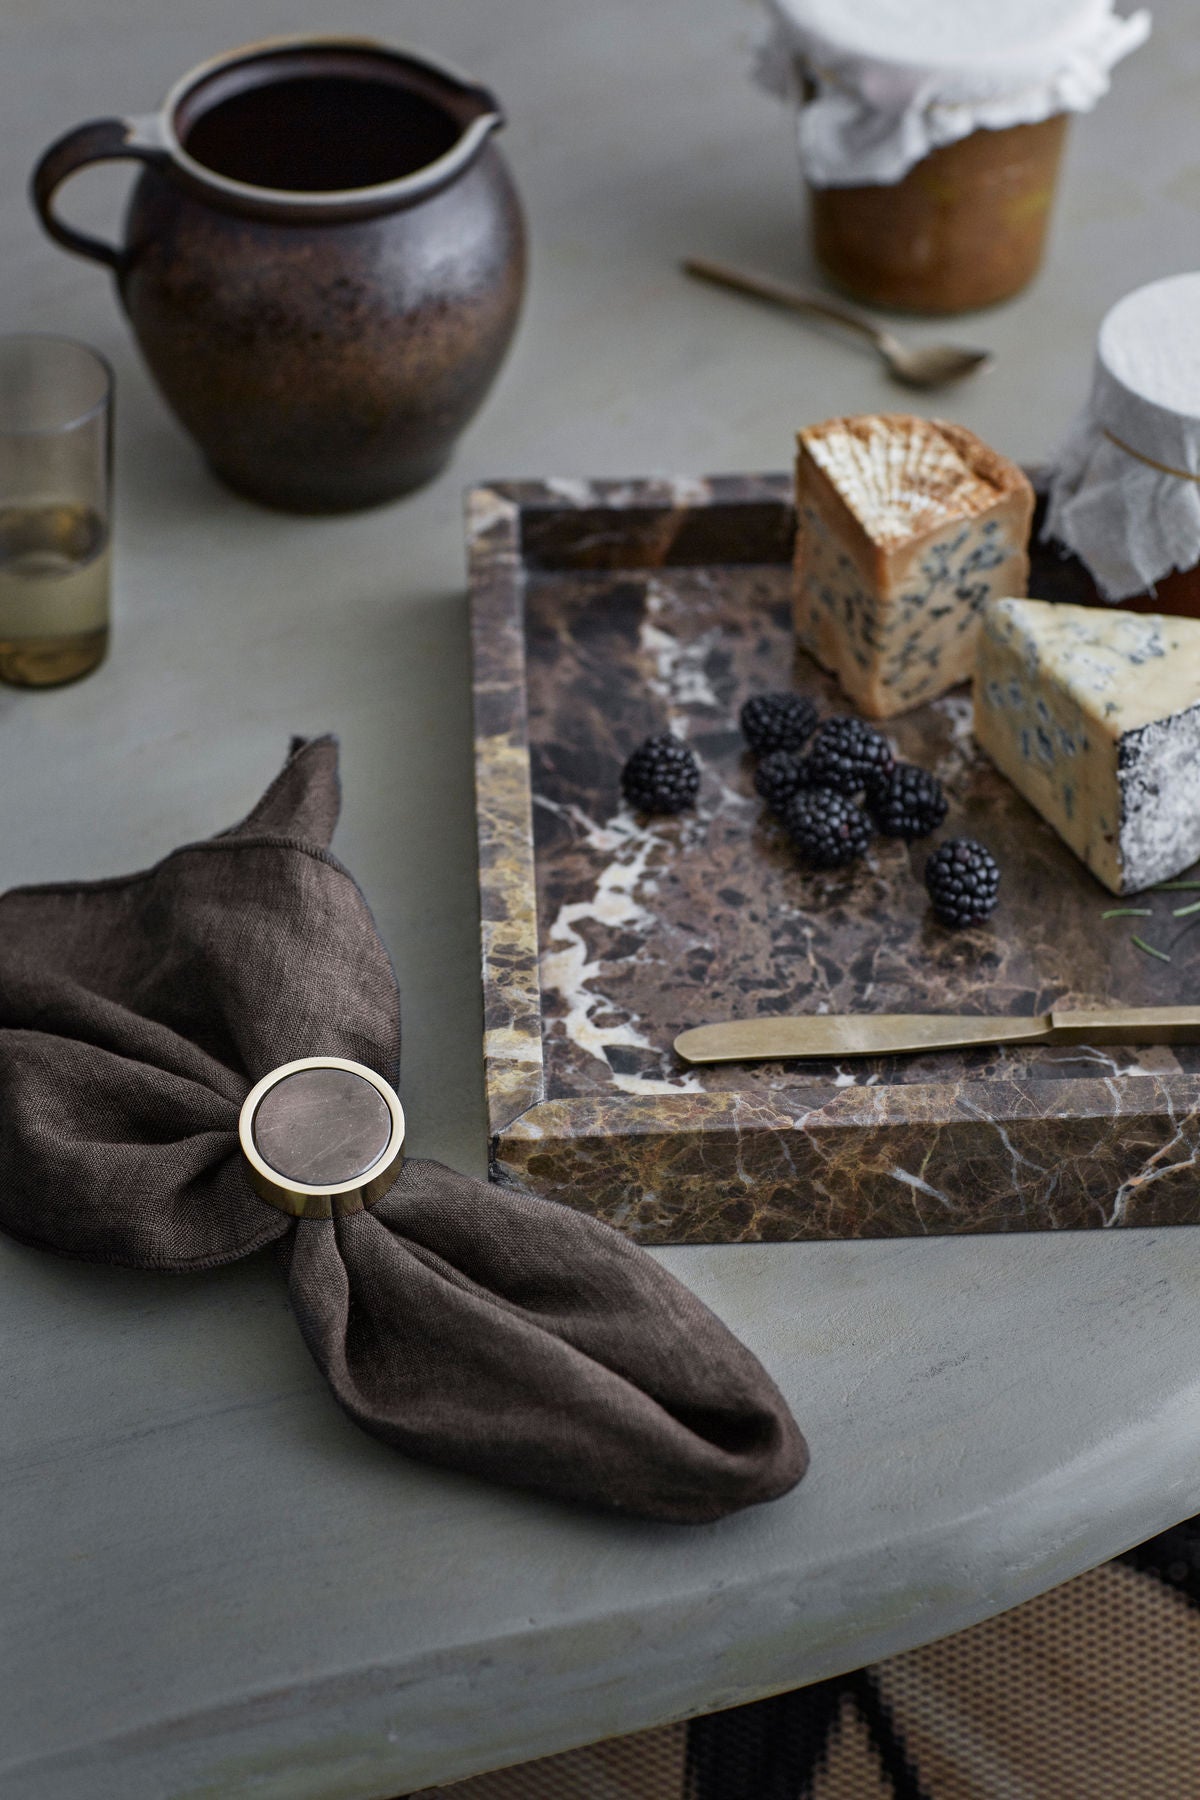 Cozy Living Jilly Marble Tray - TOFFEE BROWN - SQUARE